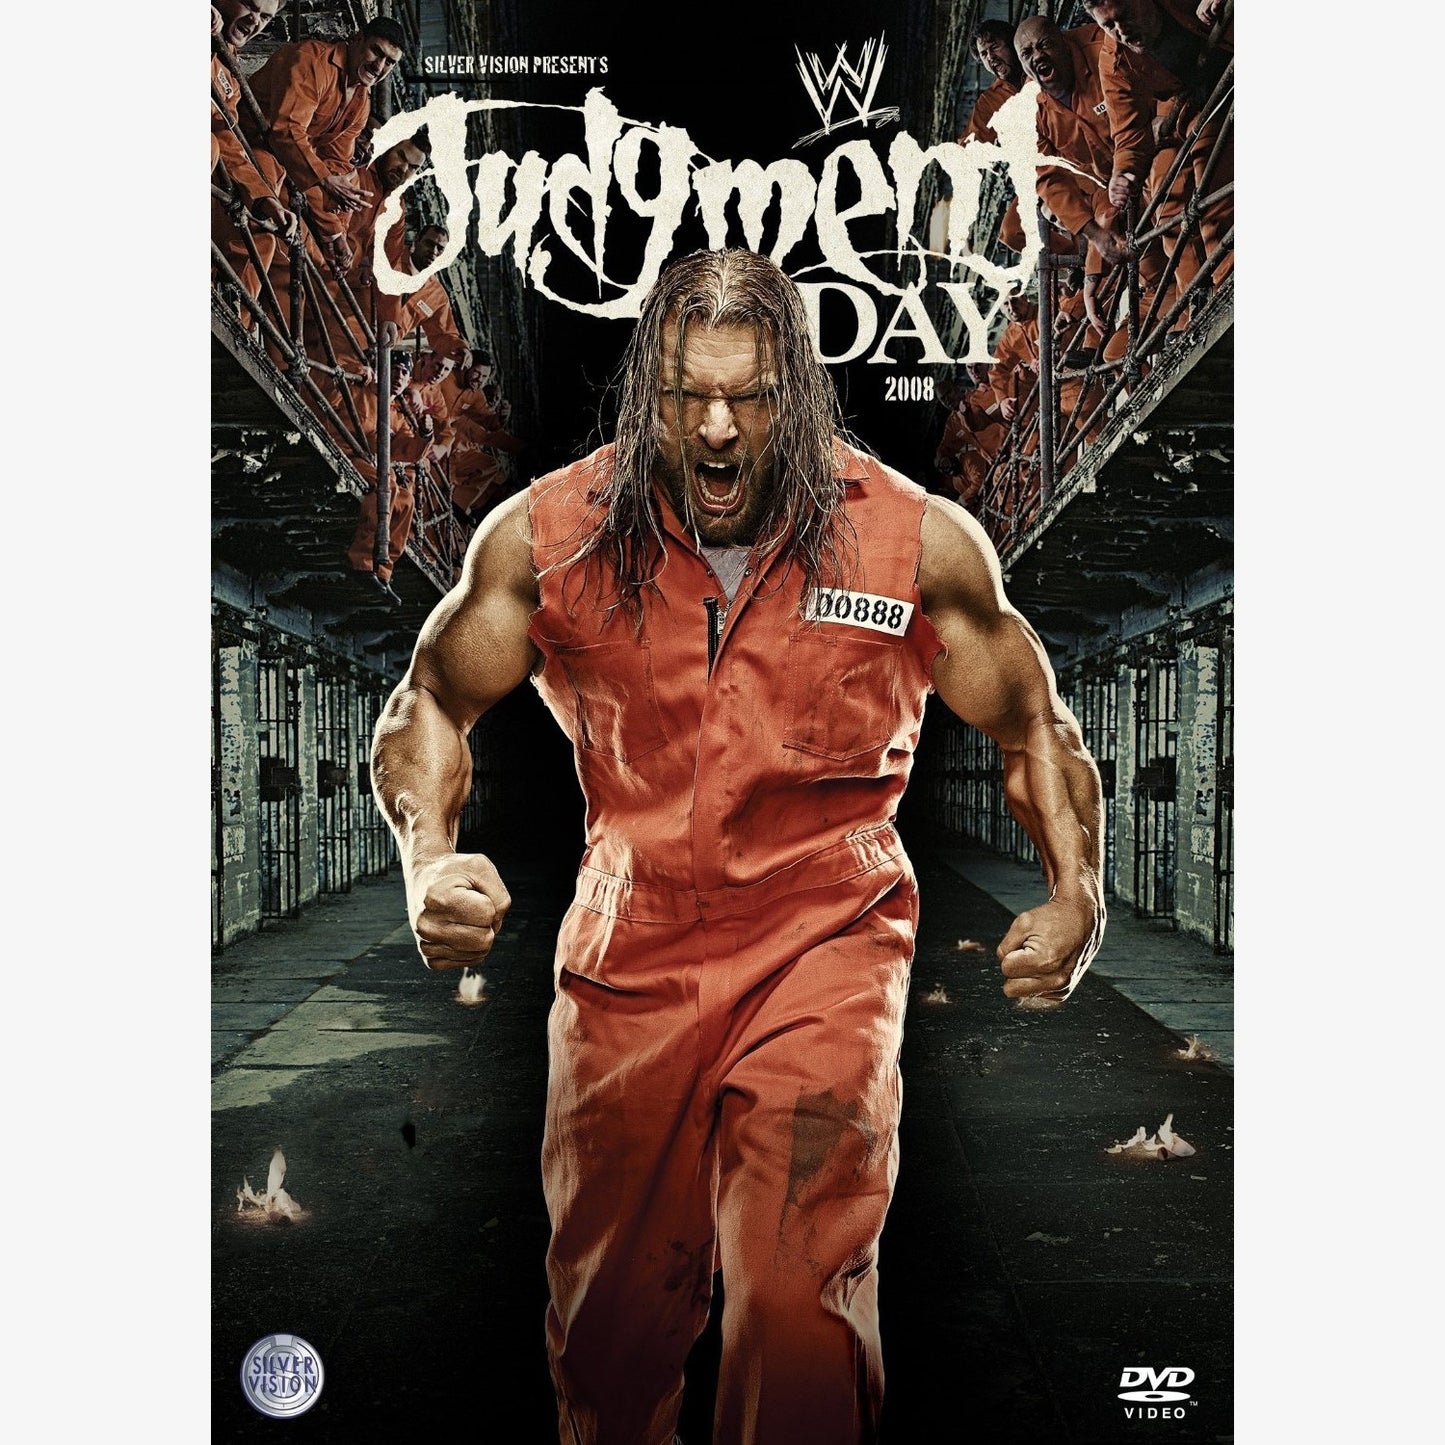 WWE Judgment Day 2008 DVD